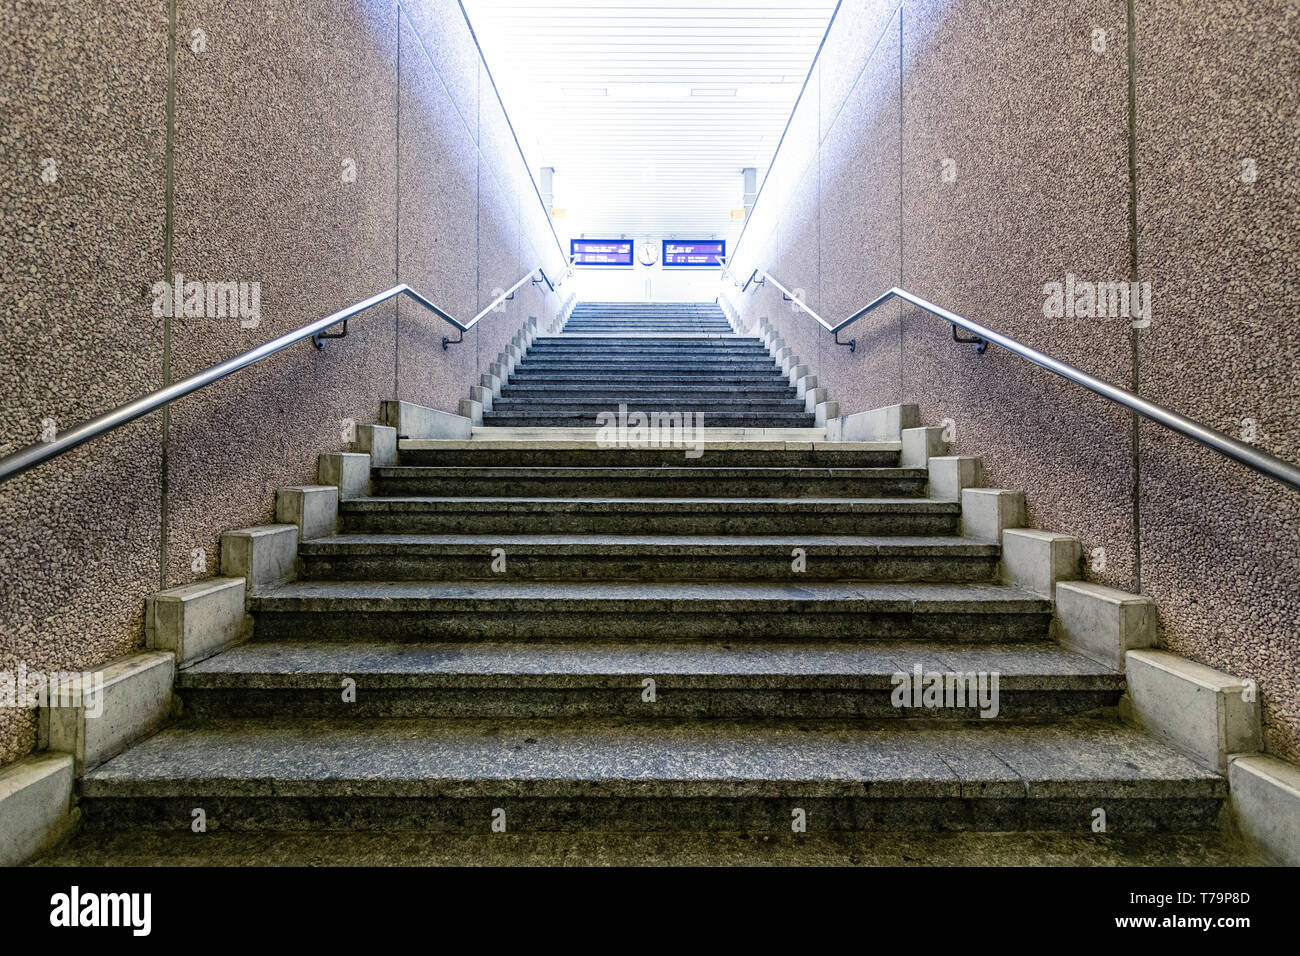 Empty staircase in a railway station upwards view. Railway station Basel Bad, Switzerland. Stock Photo